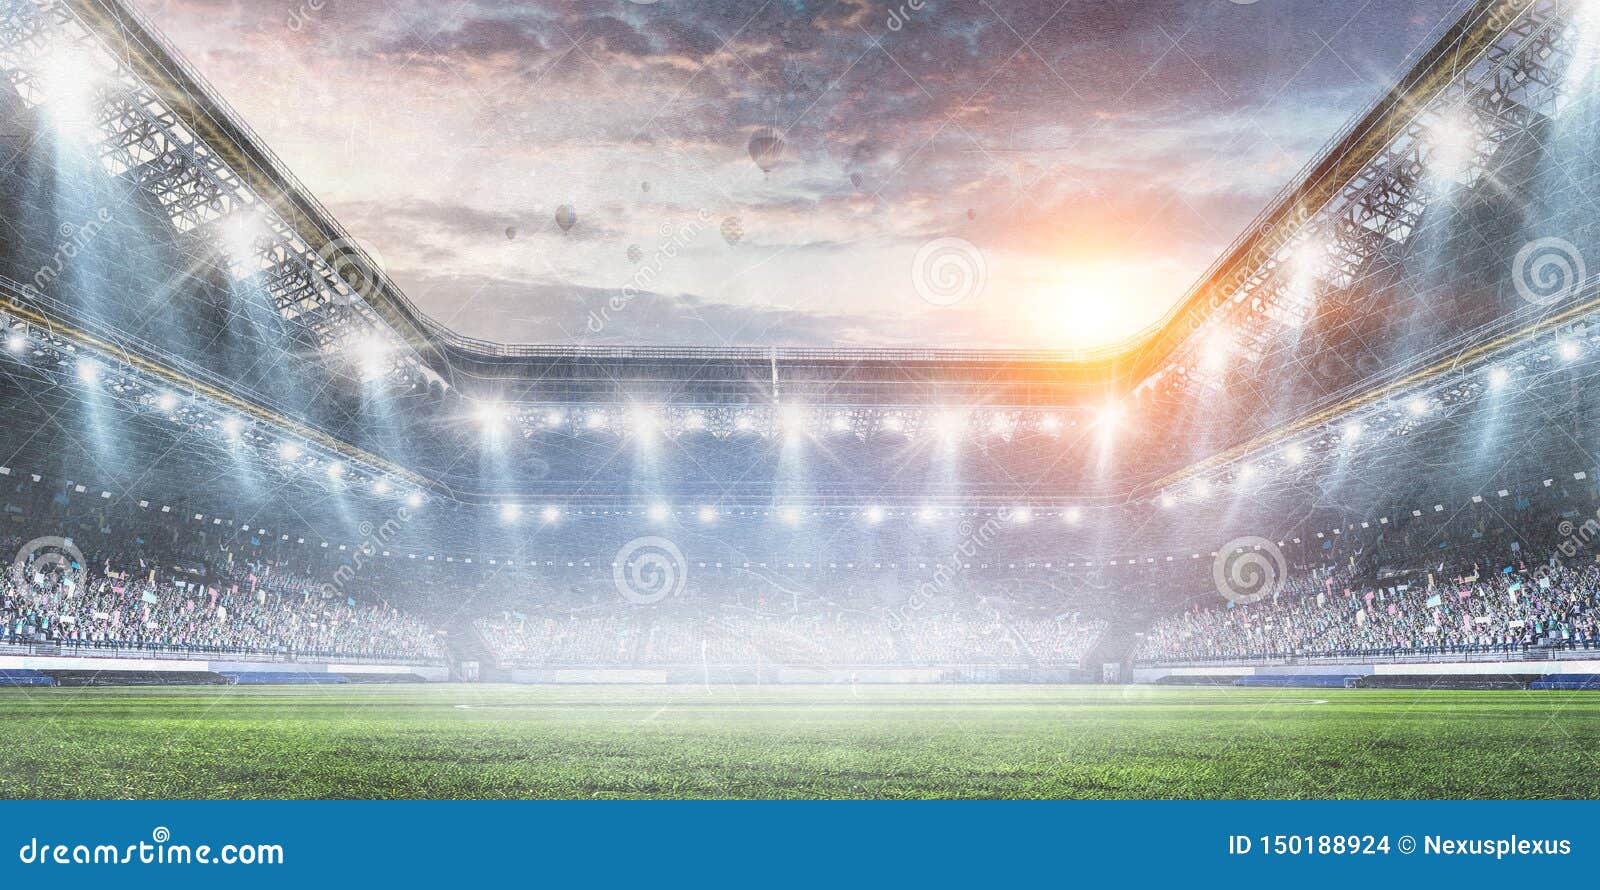 Football Stadium Background With Flying Ball Stock Photo Image Of Event Arena